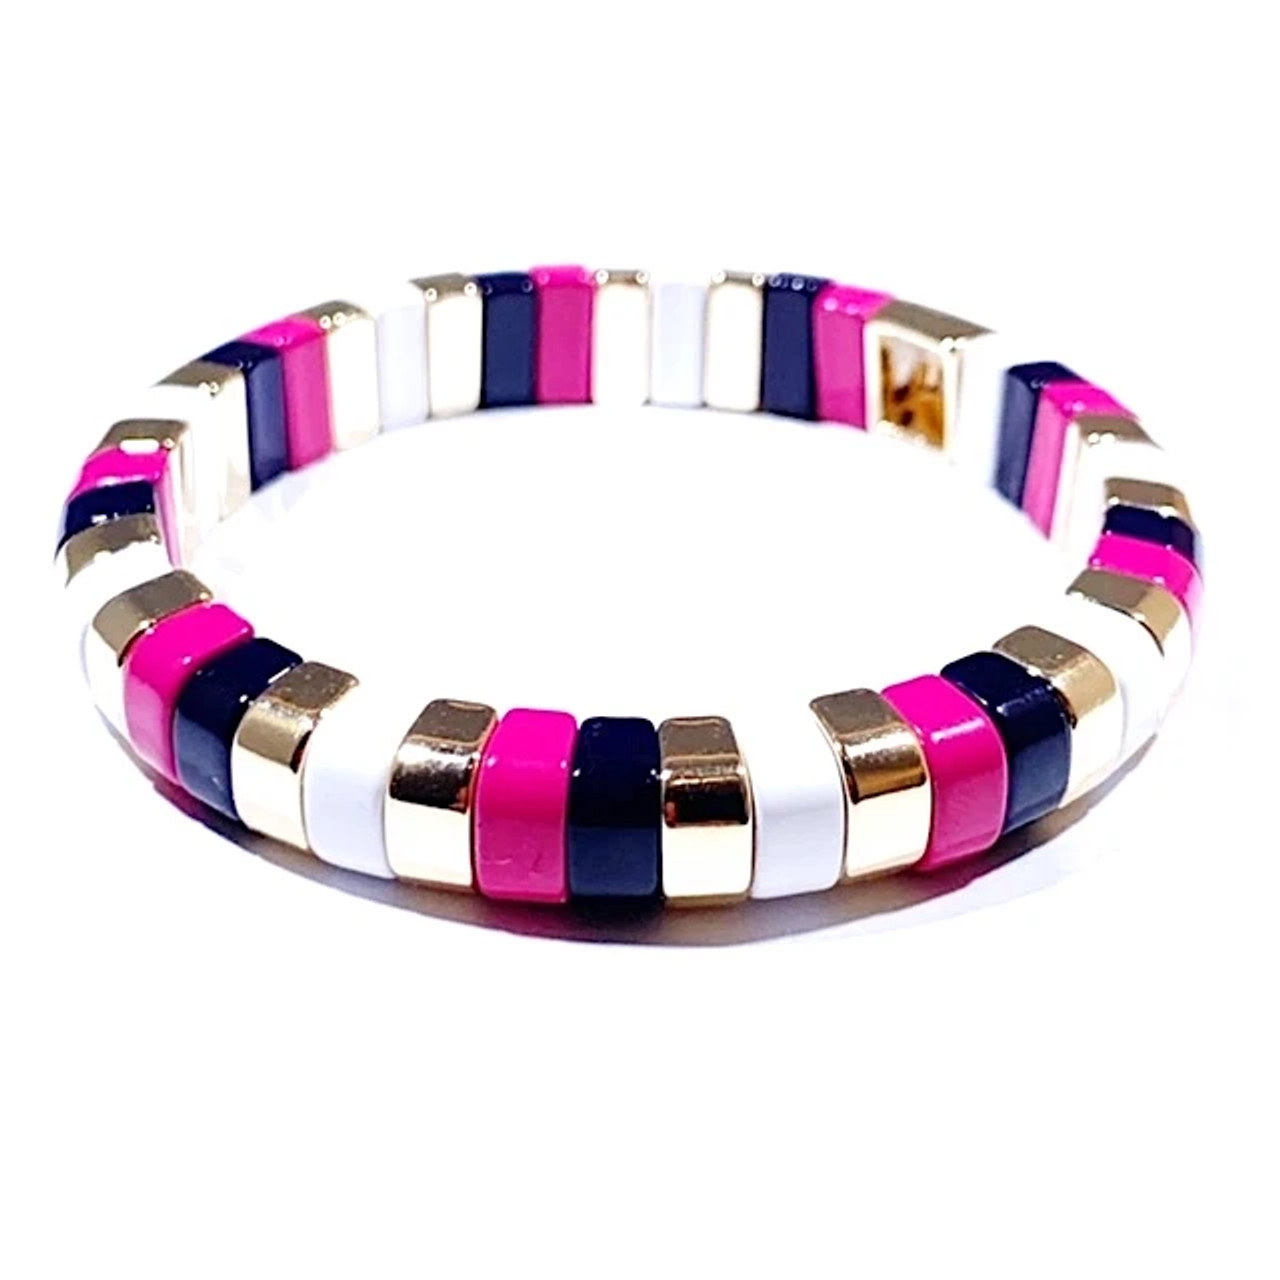 Stack of 3, Hot Pink Bangles with Gold Accent Bracelet